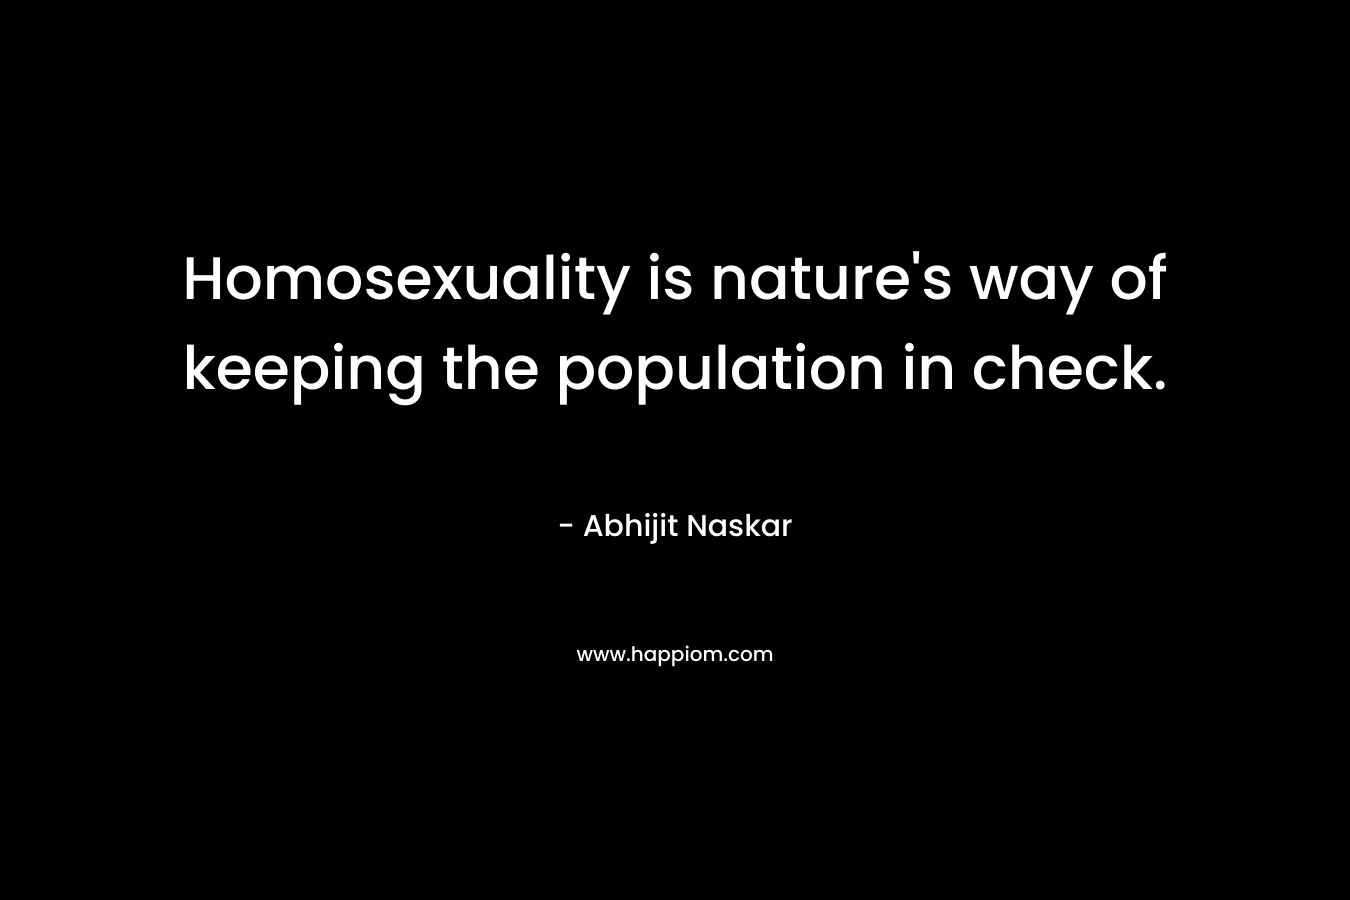 Homosexuality is nature's way of keeping the population in check.